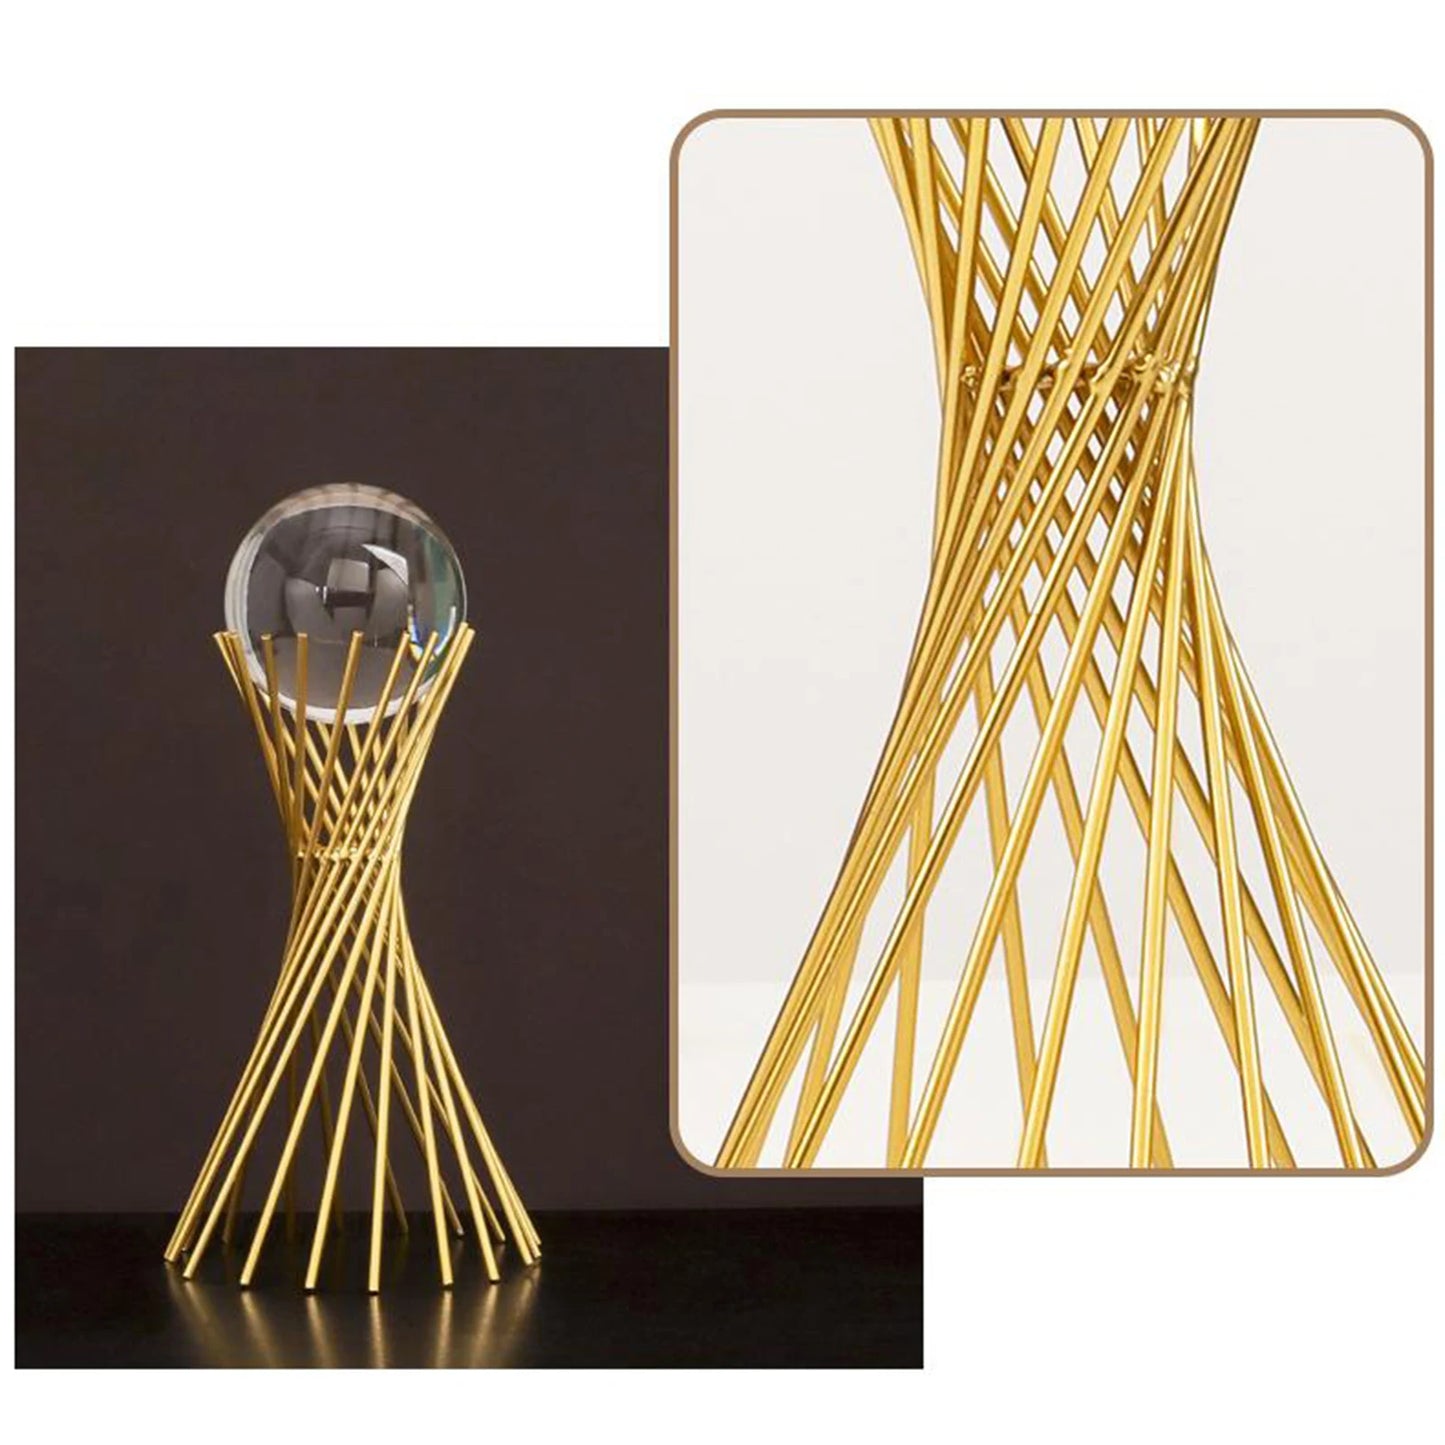 Golden Iron Crystal Ball with Geometric Stand Ornaments Desk Statues Sculpture Decor, for Living Room Bedroom Office Desktop